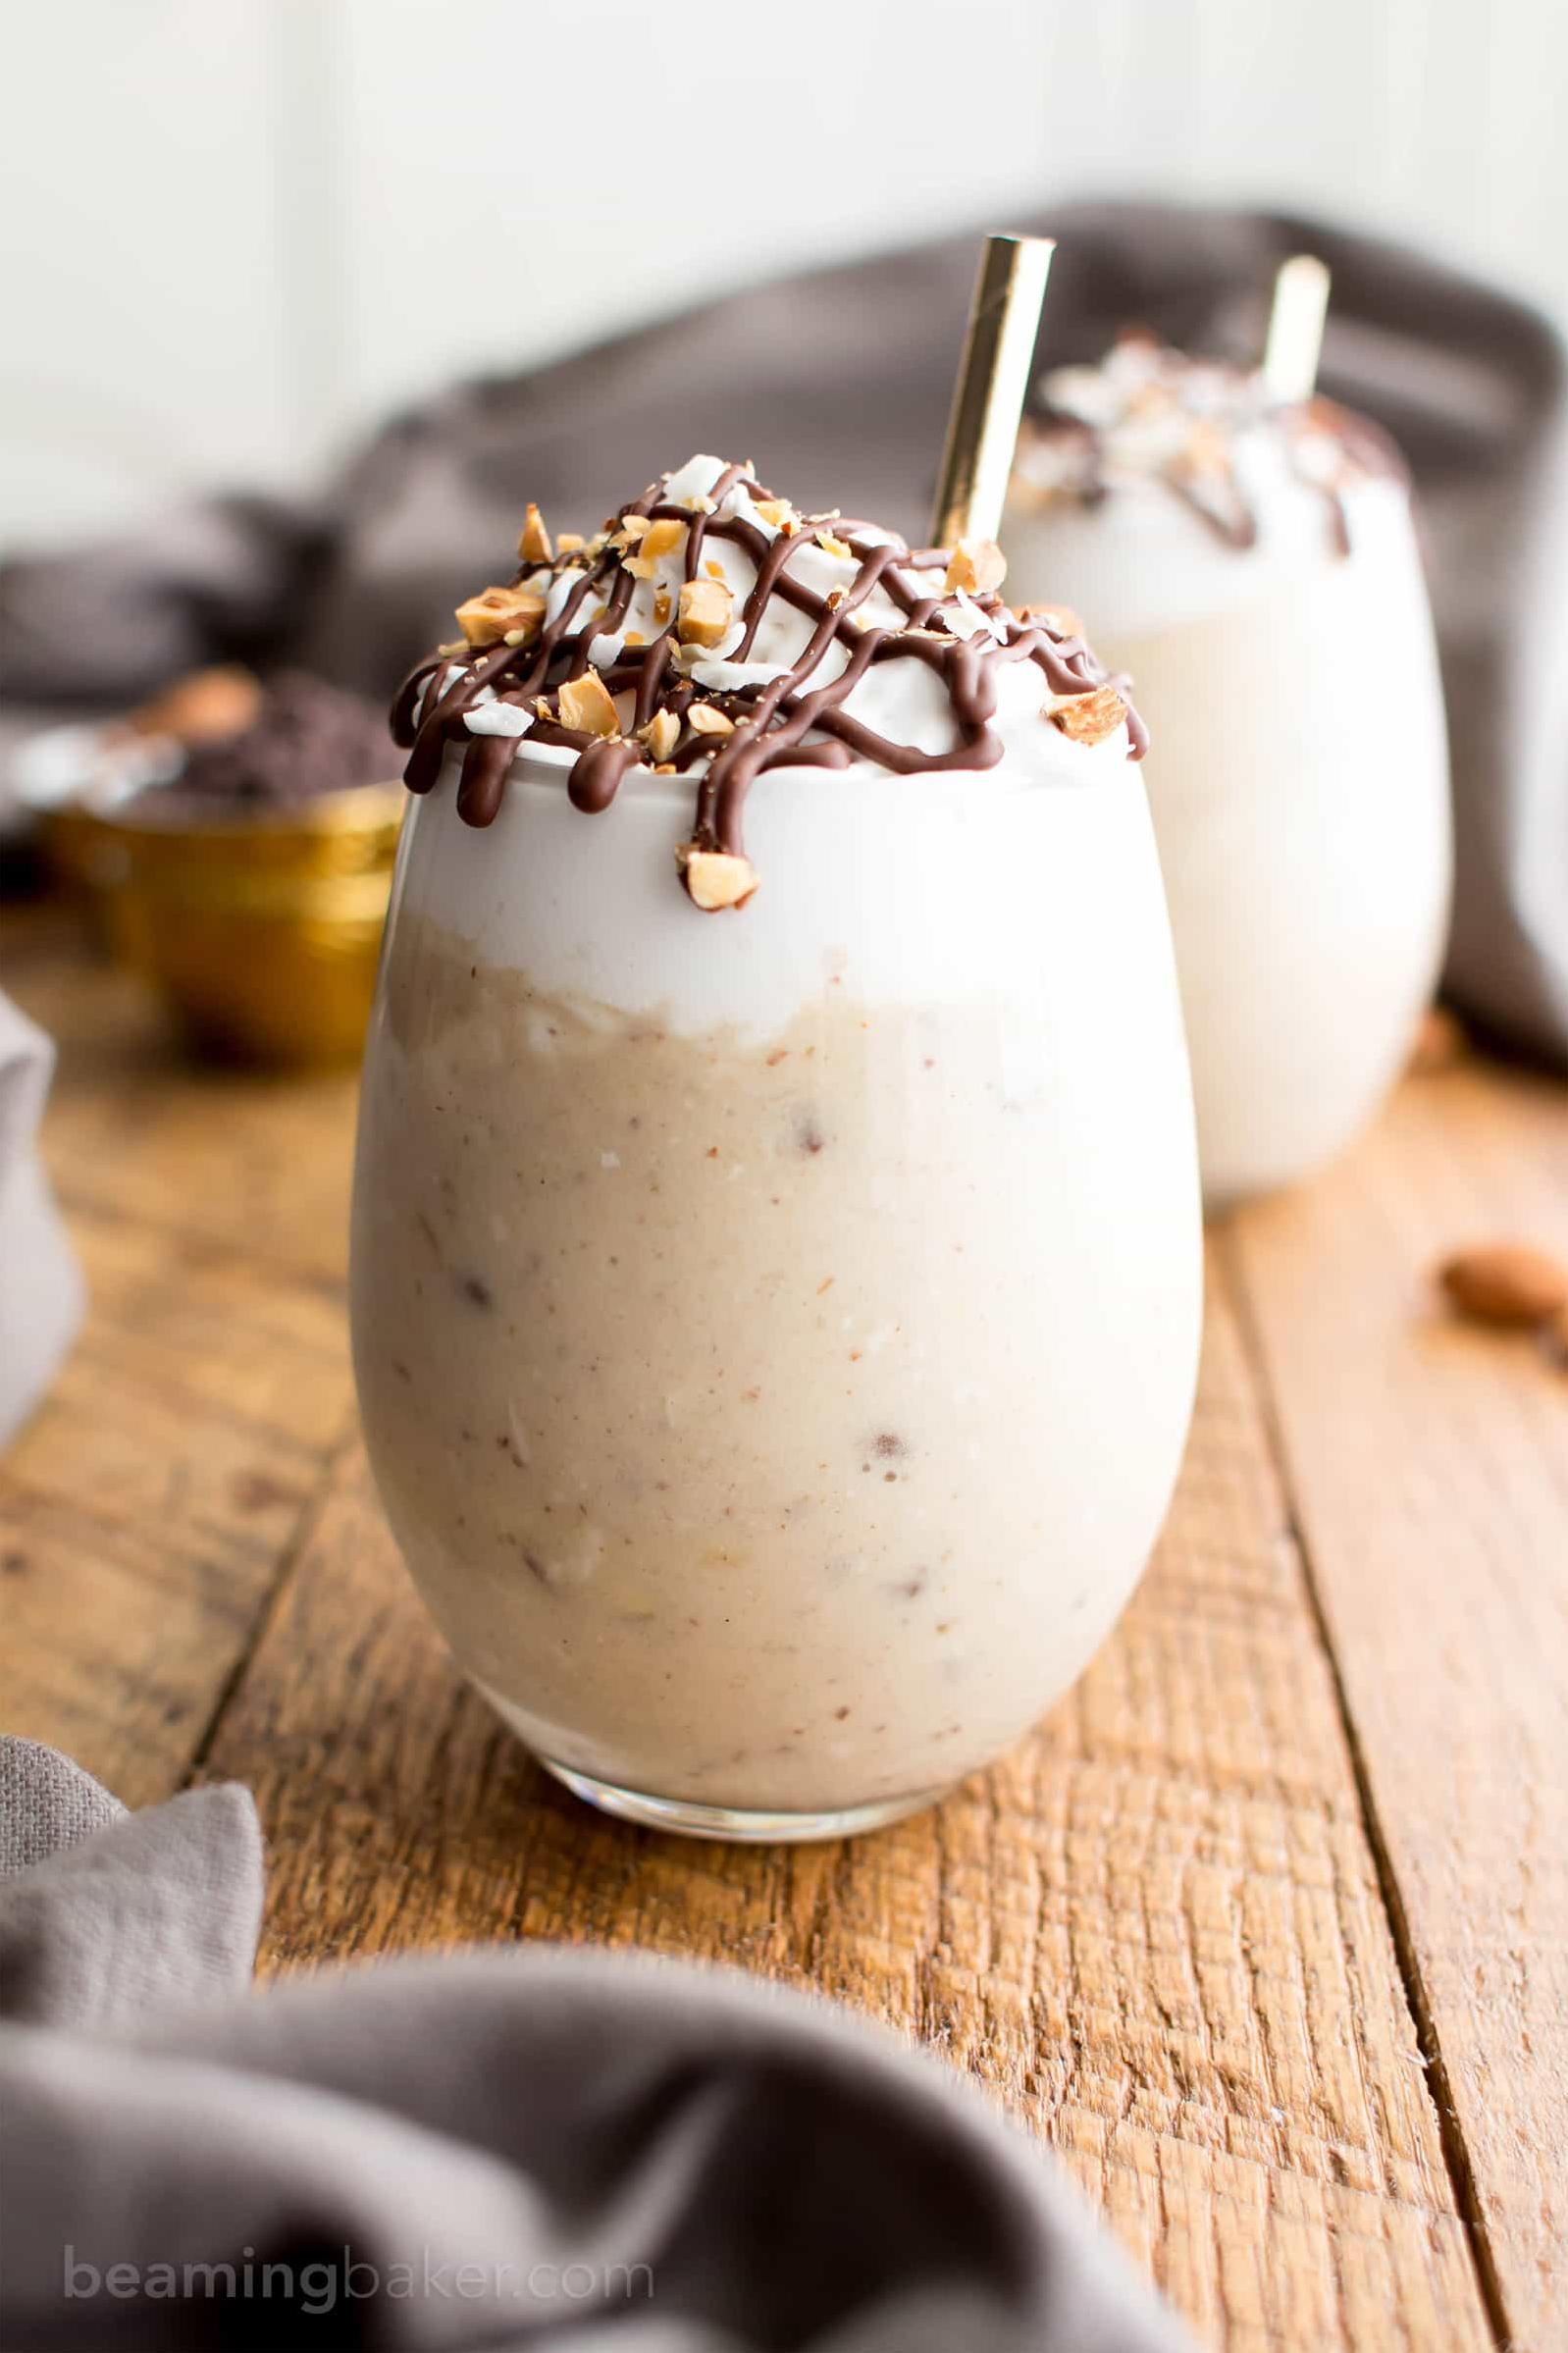  Satisfy your sweet tooth with this creamy almond shake.